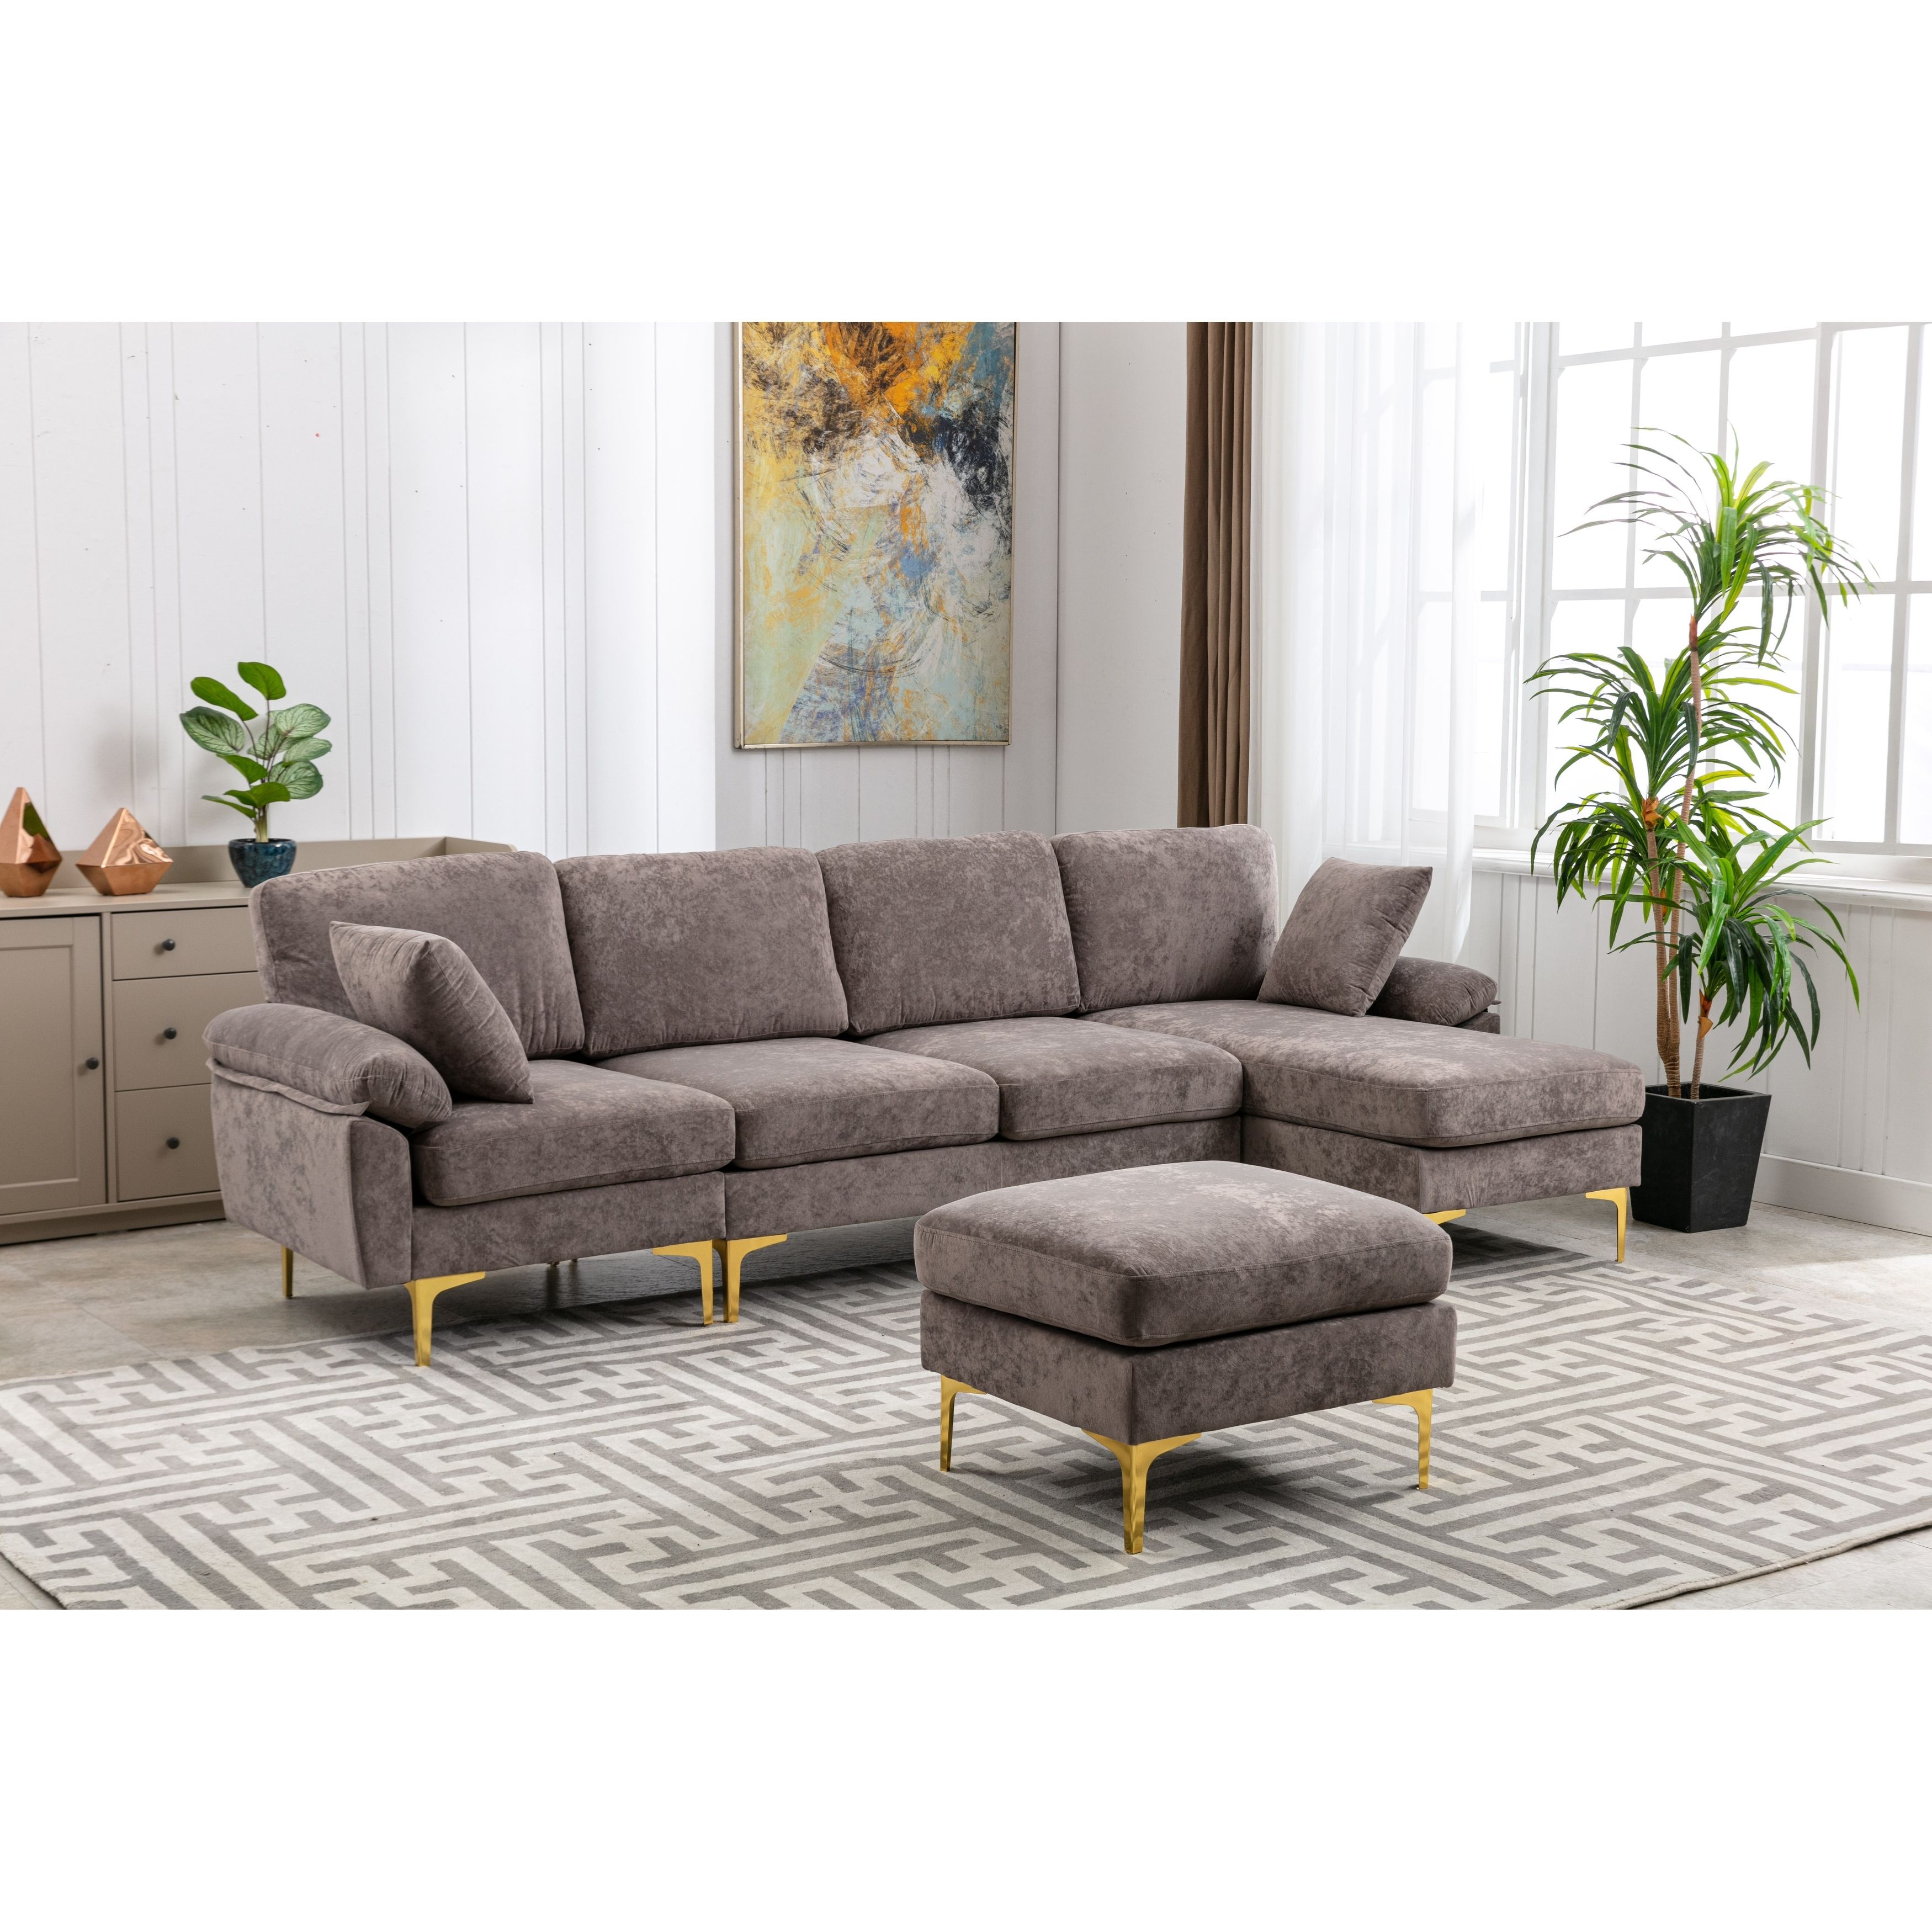 Living Room Sectional Sofa, L Shaped Upholstered Couch With Movable Ottoman,  Convertible Modular Sofa With Gold Metal Legs – On Sale – – 36876876 Throughout Sectional Sofas With Movable Ottoman (View 16 of 20)